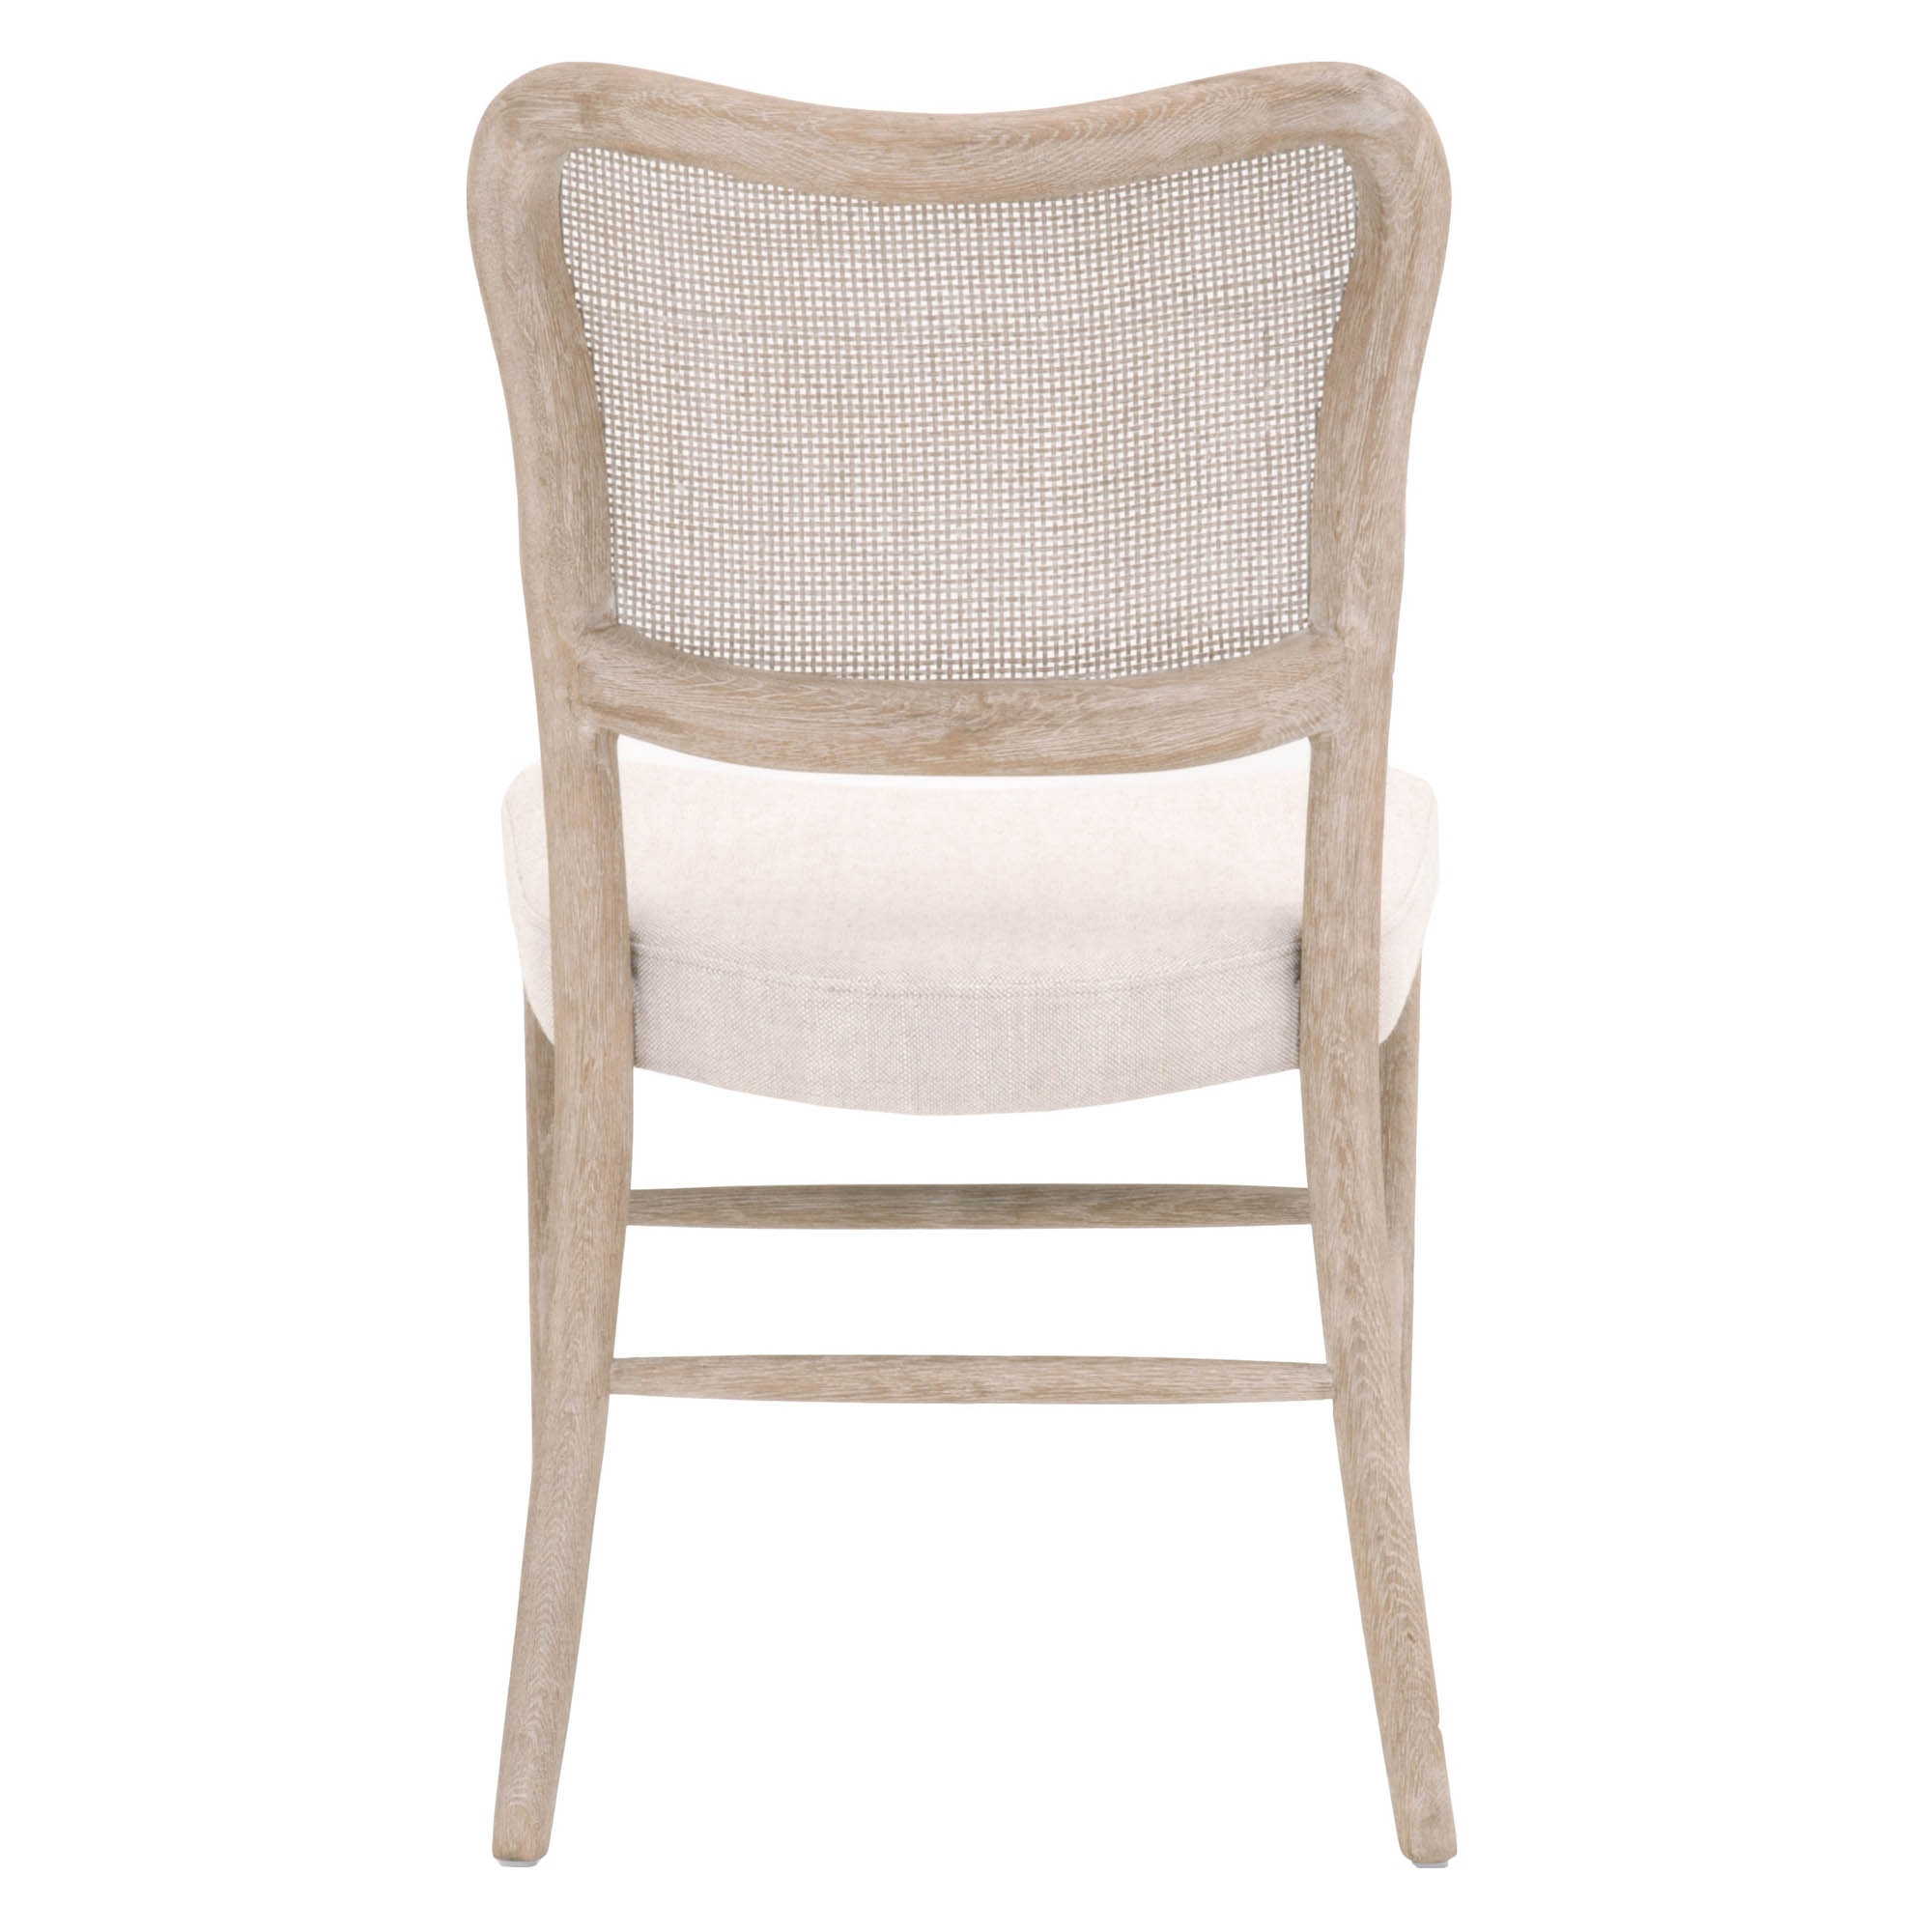 Coraline Dining Chair, Bisque, Set of 2 - Image 4